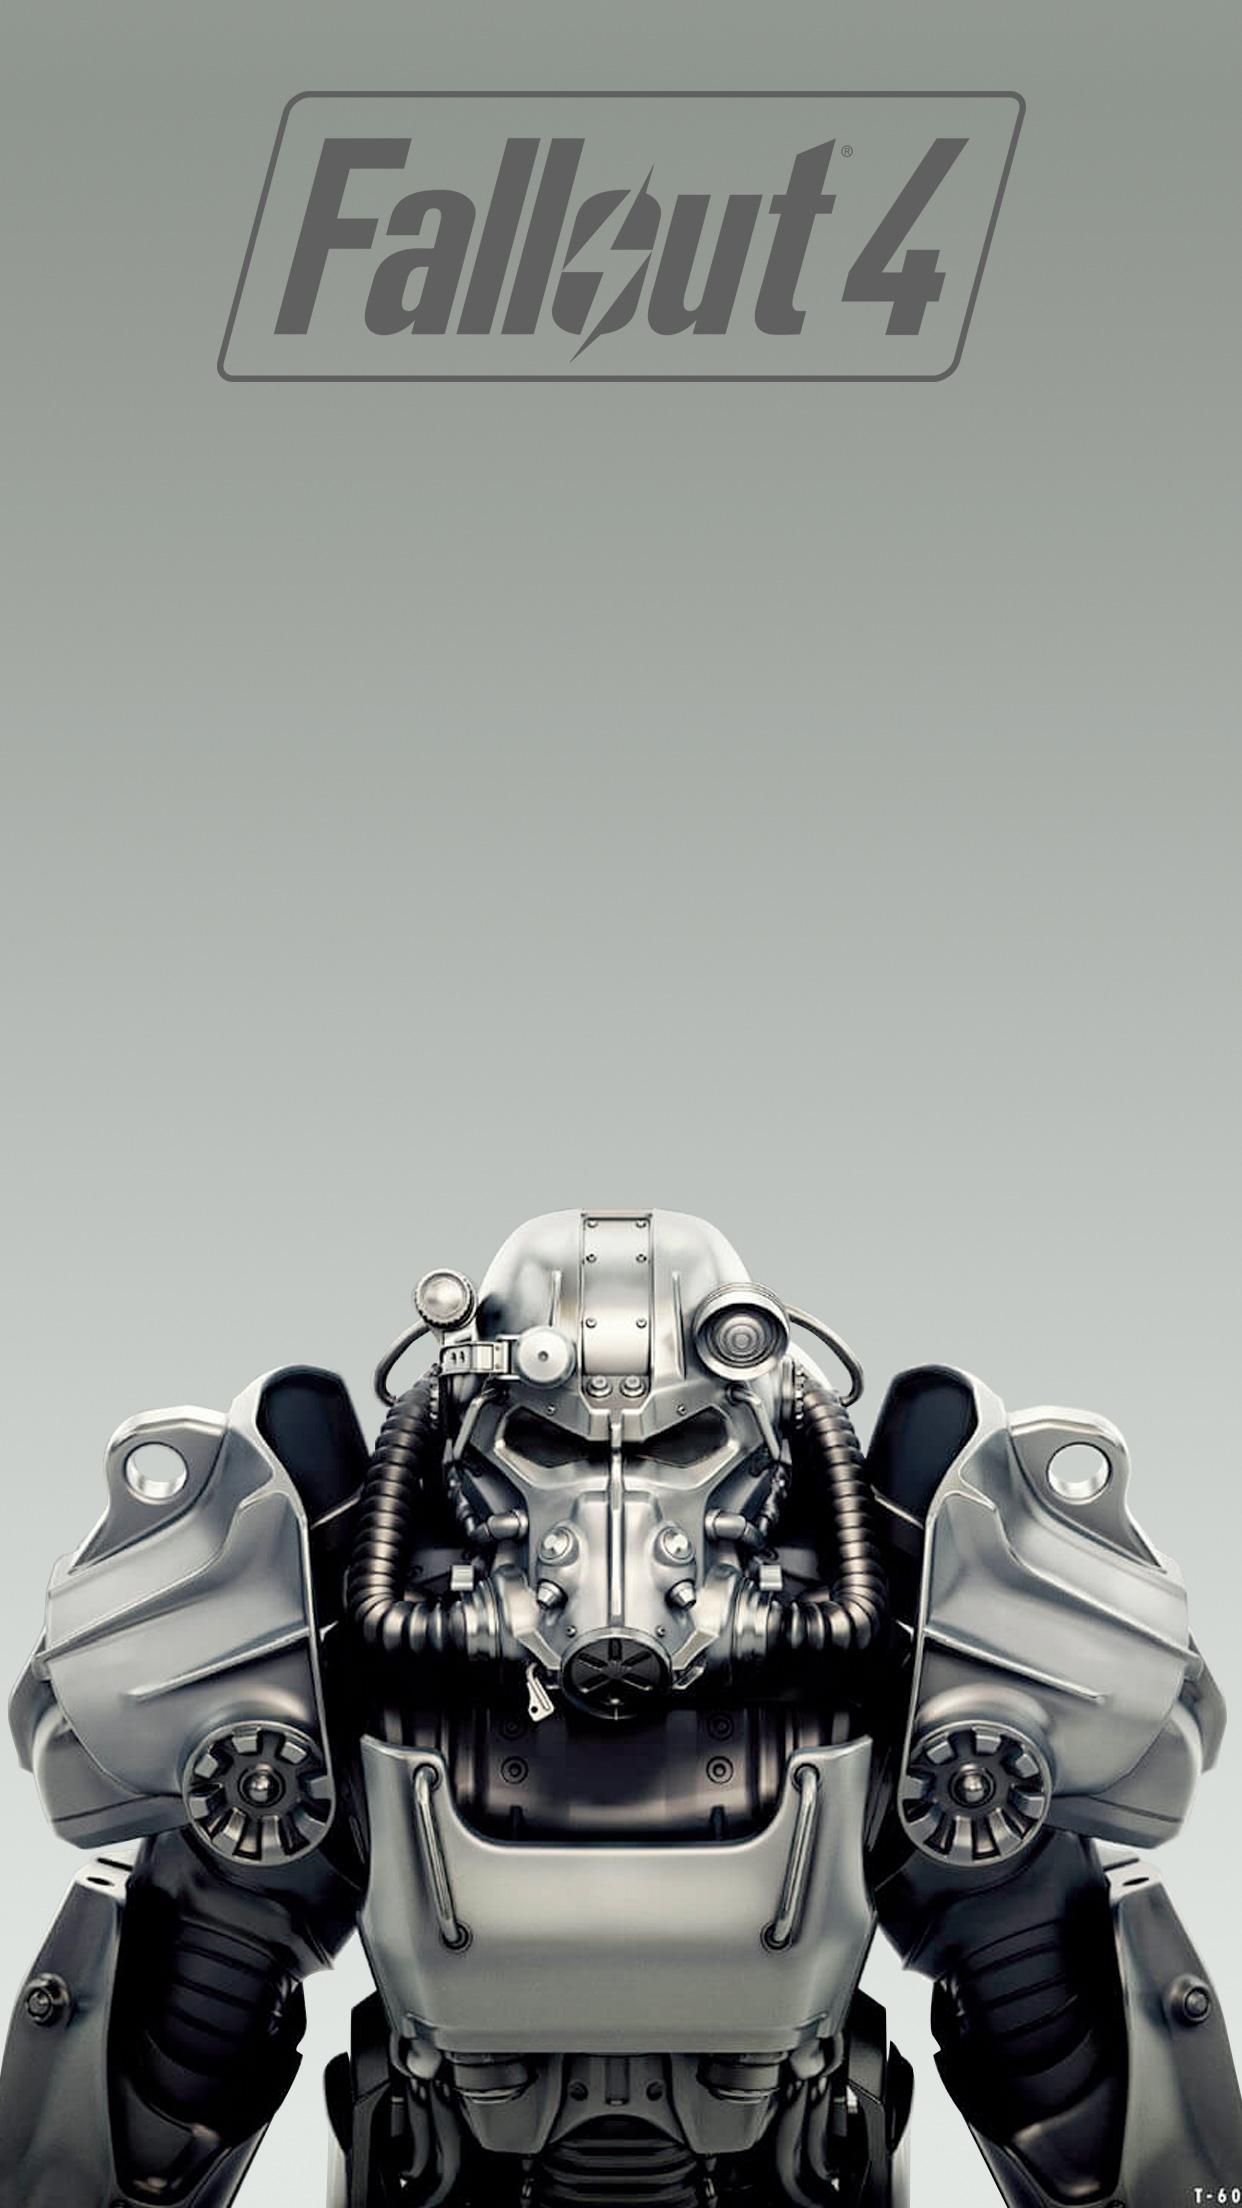 Fallout 4 Power Armor Mobile Wallpaper for your Phone